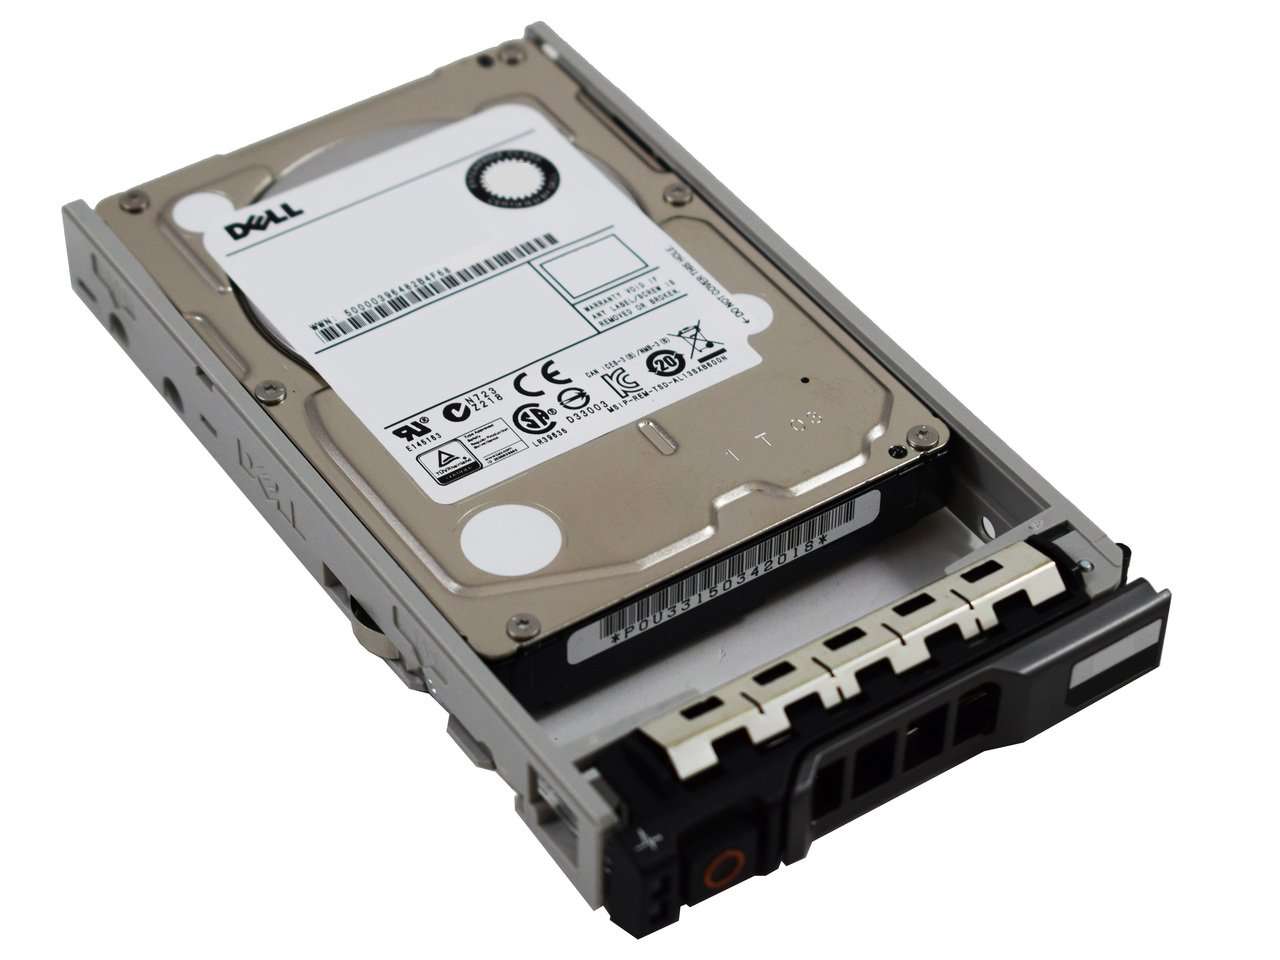 Dell G13 N16WV 2TB 7.2K RPM SAS 12Gb/s 512N 2.5" NearLine Manufacturer Recertified HDD